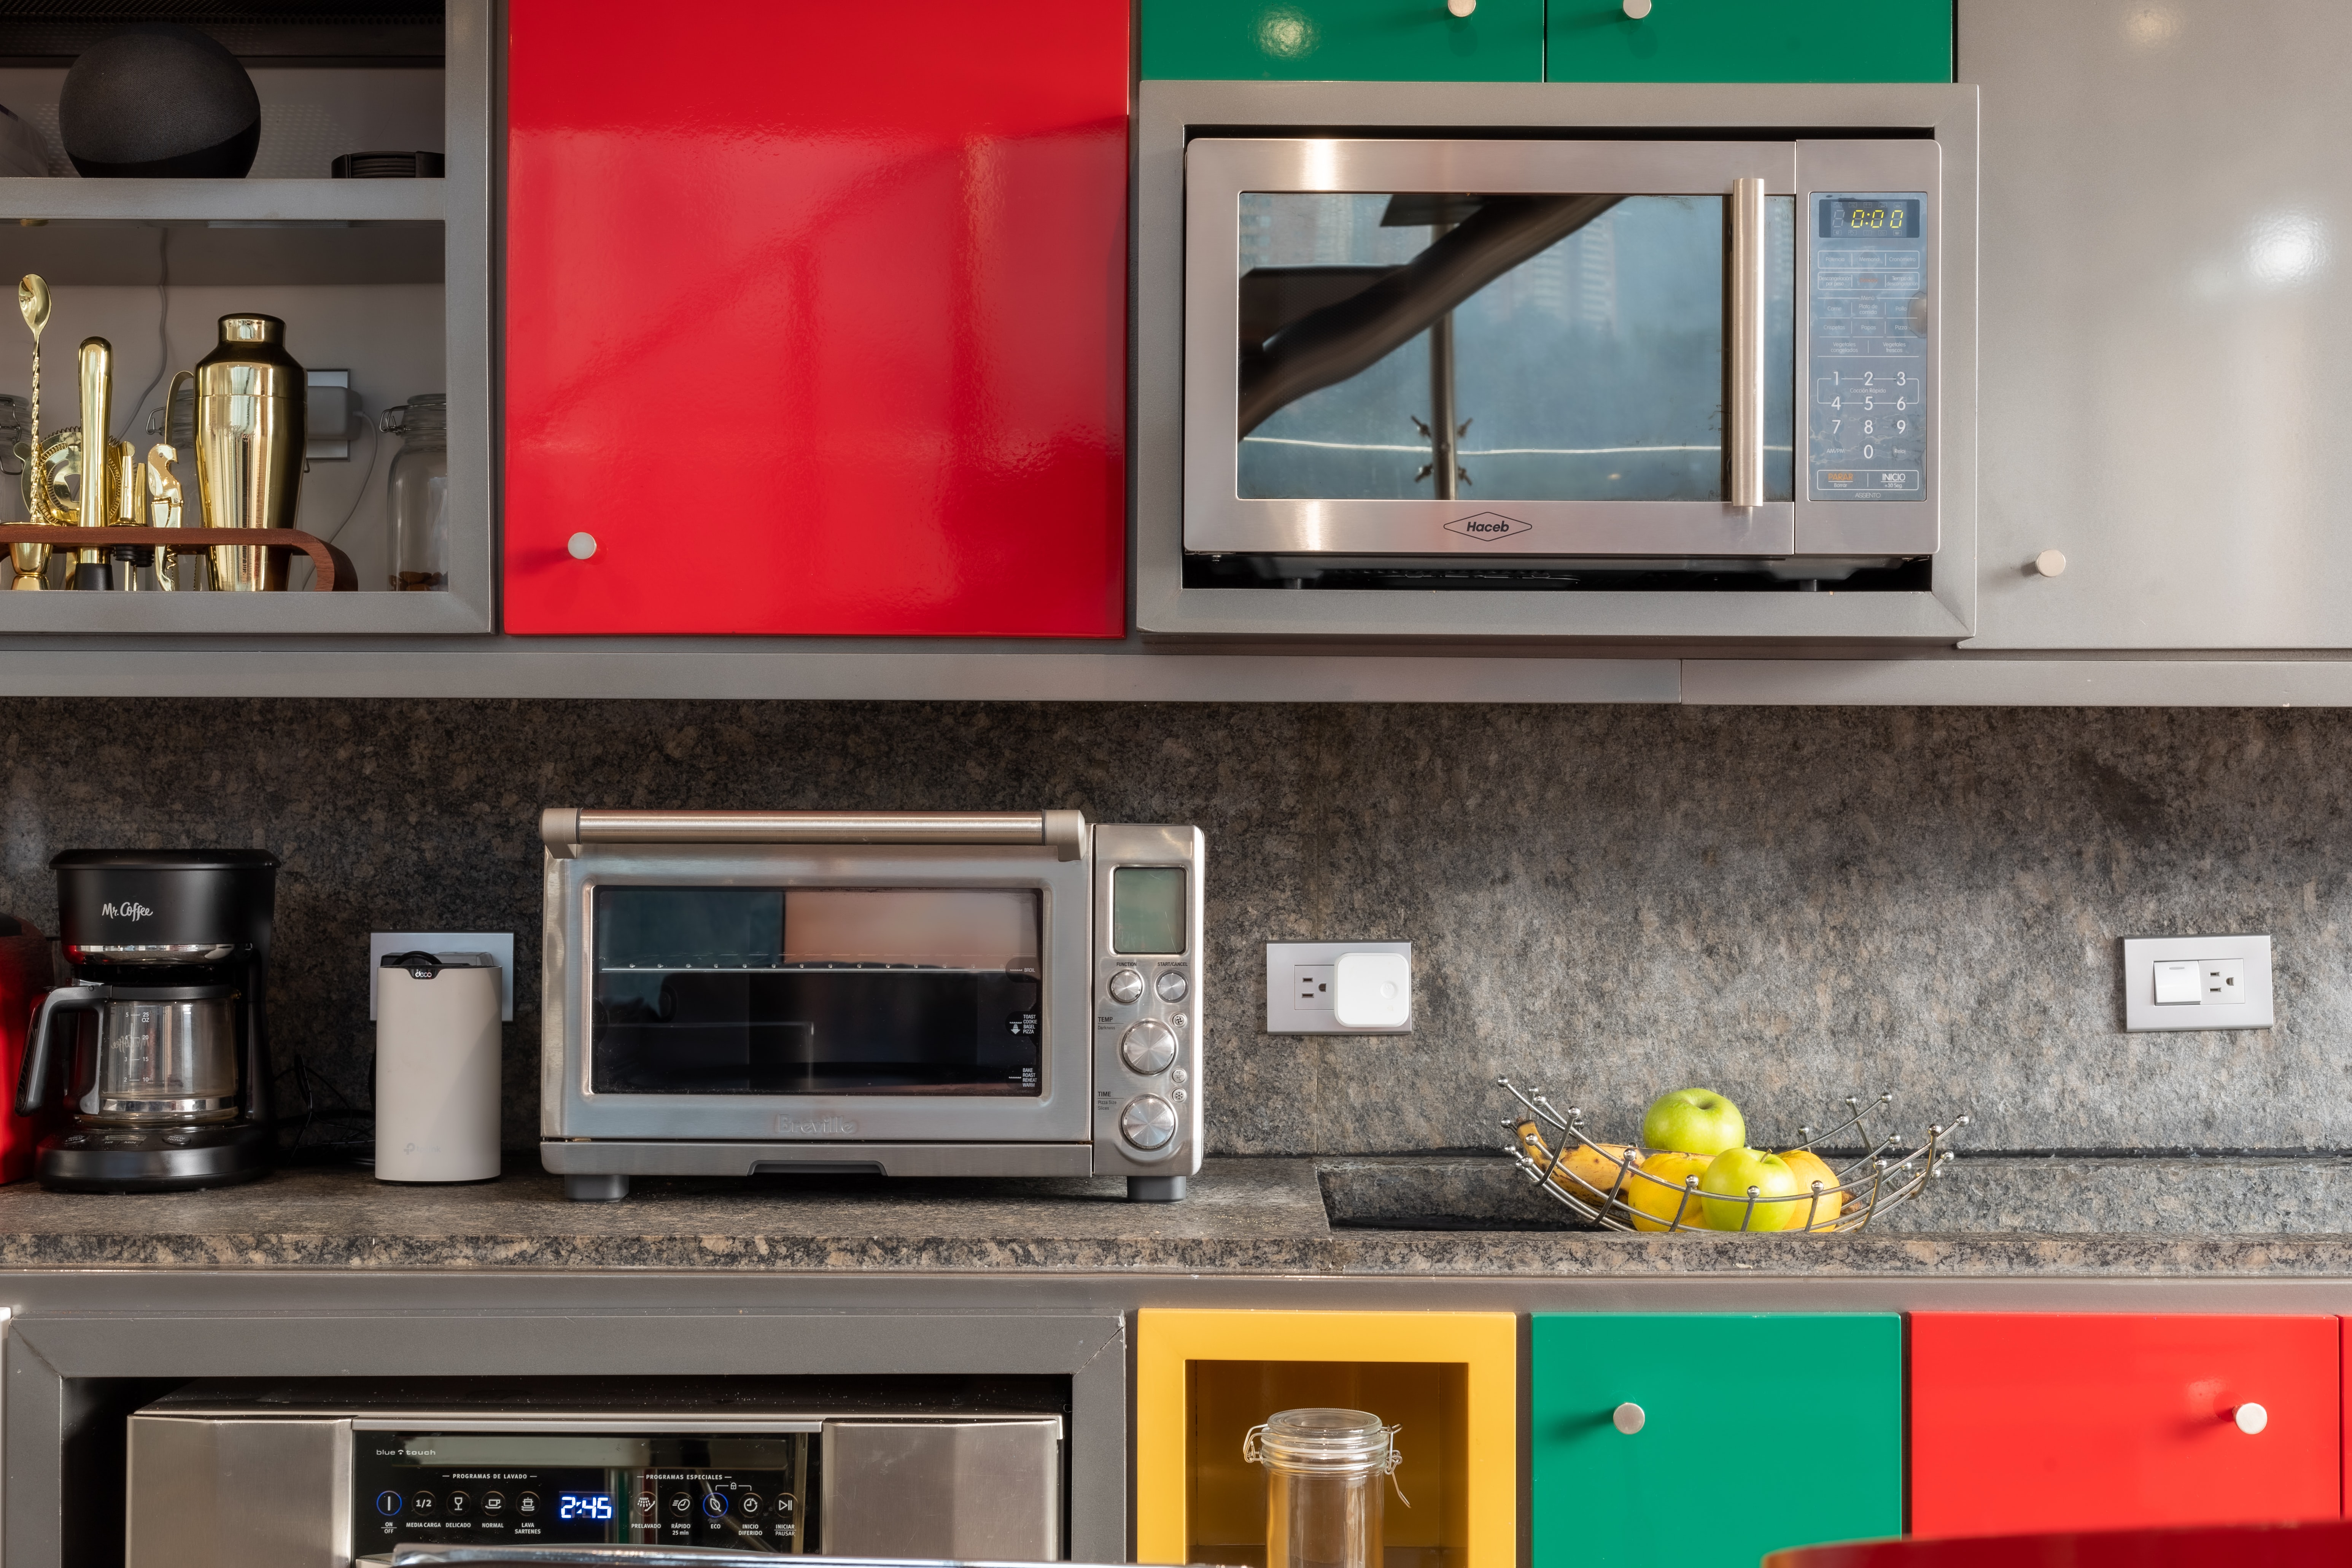 Are Microwave Drawers Worth the Extra Expense?